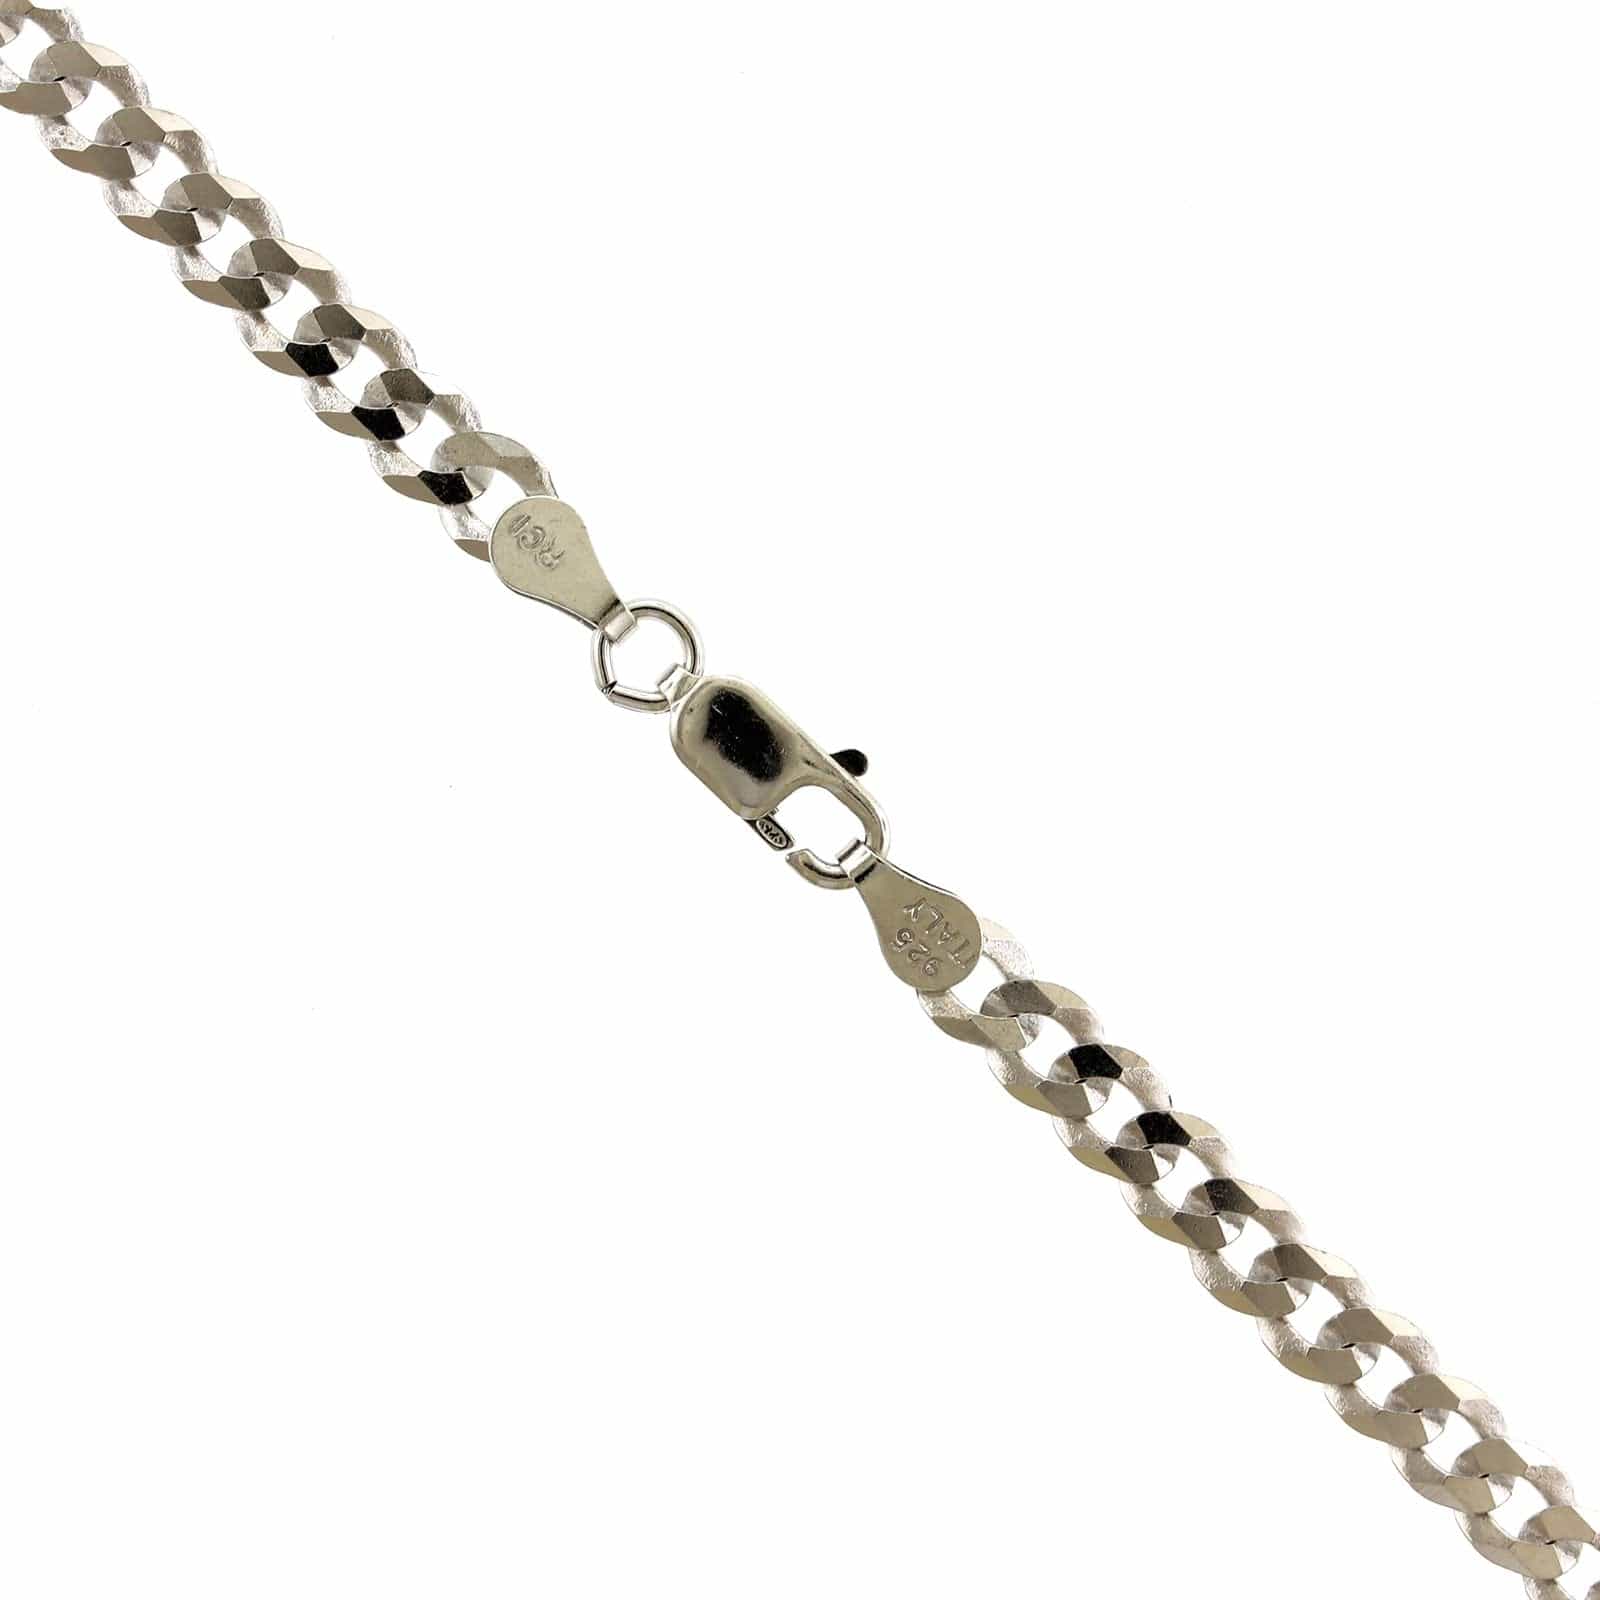 Flat Curb Chain Necklace - 7 mm - Silver - SETT&Co